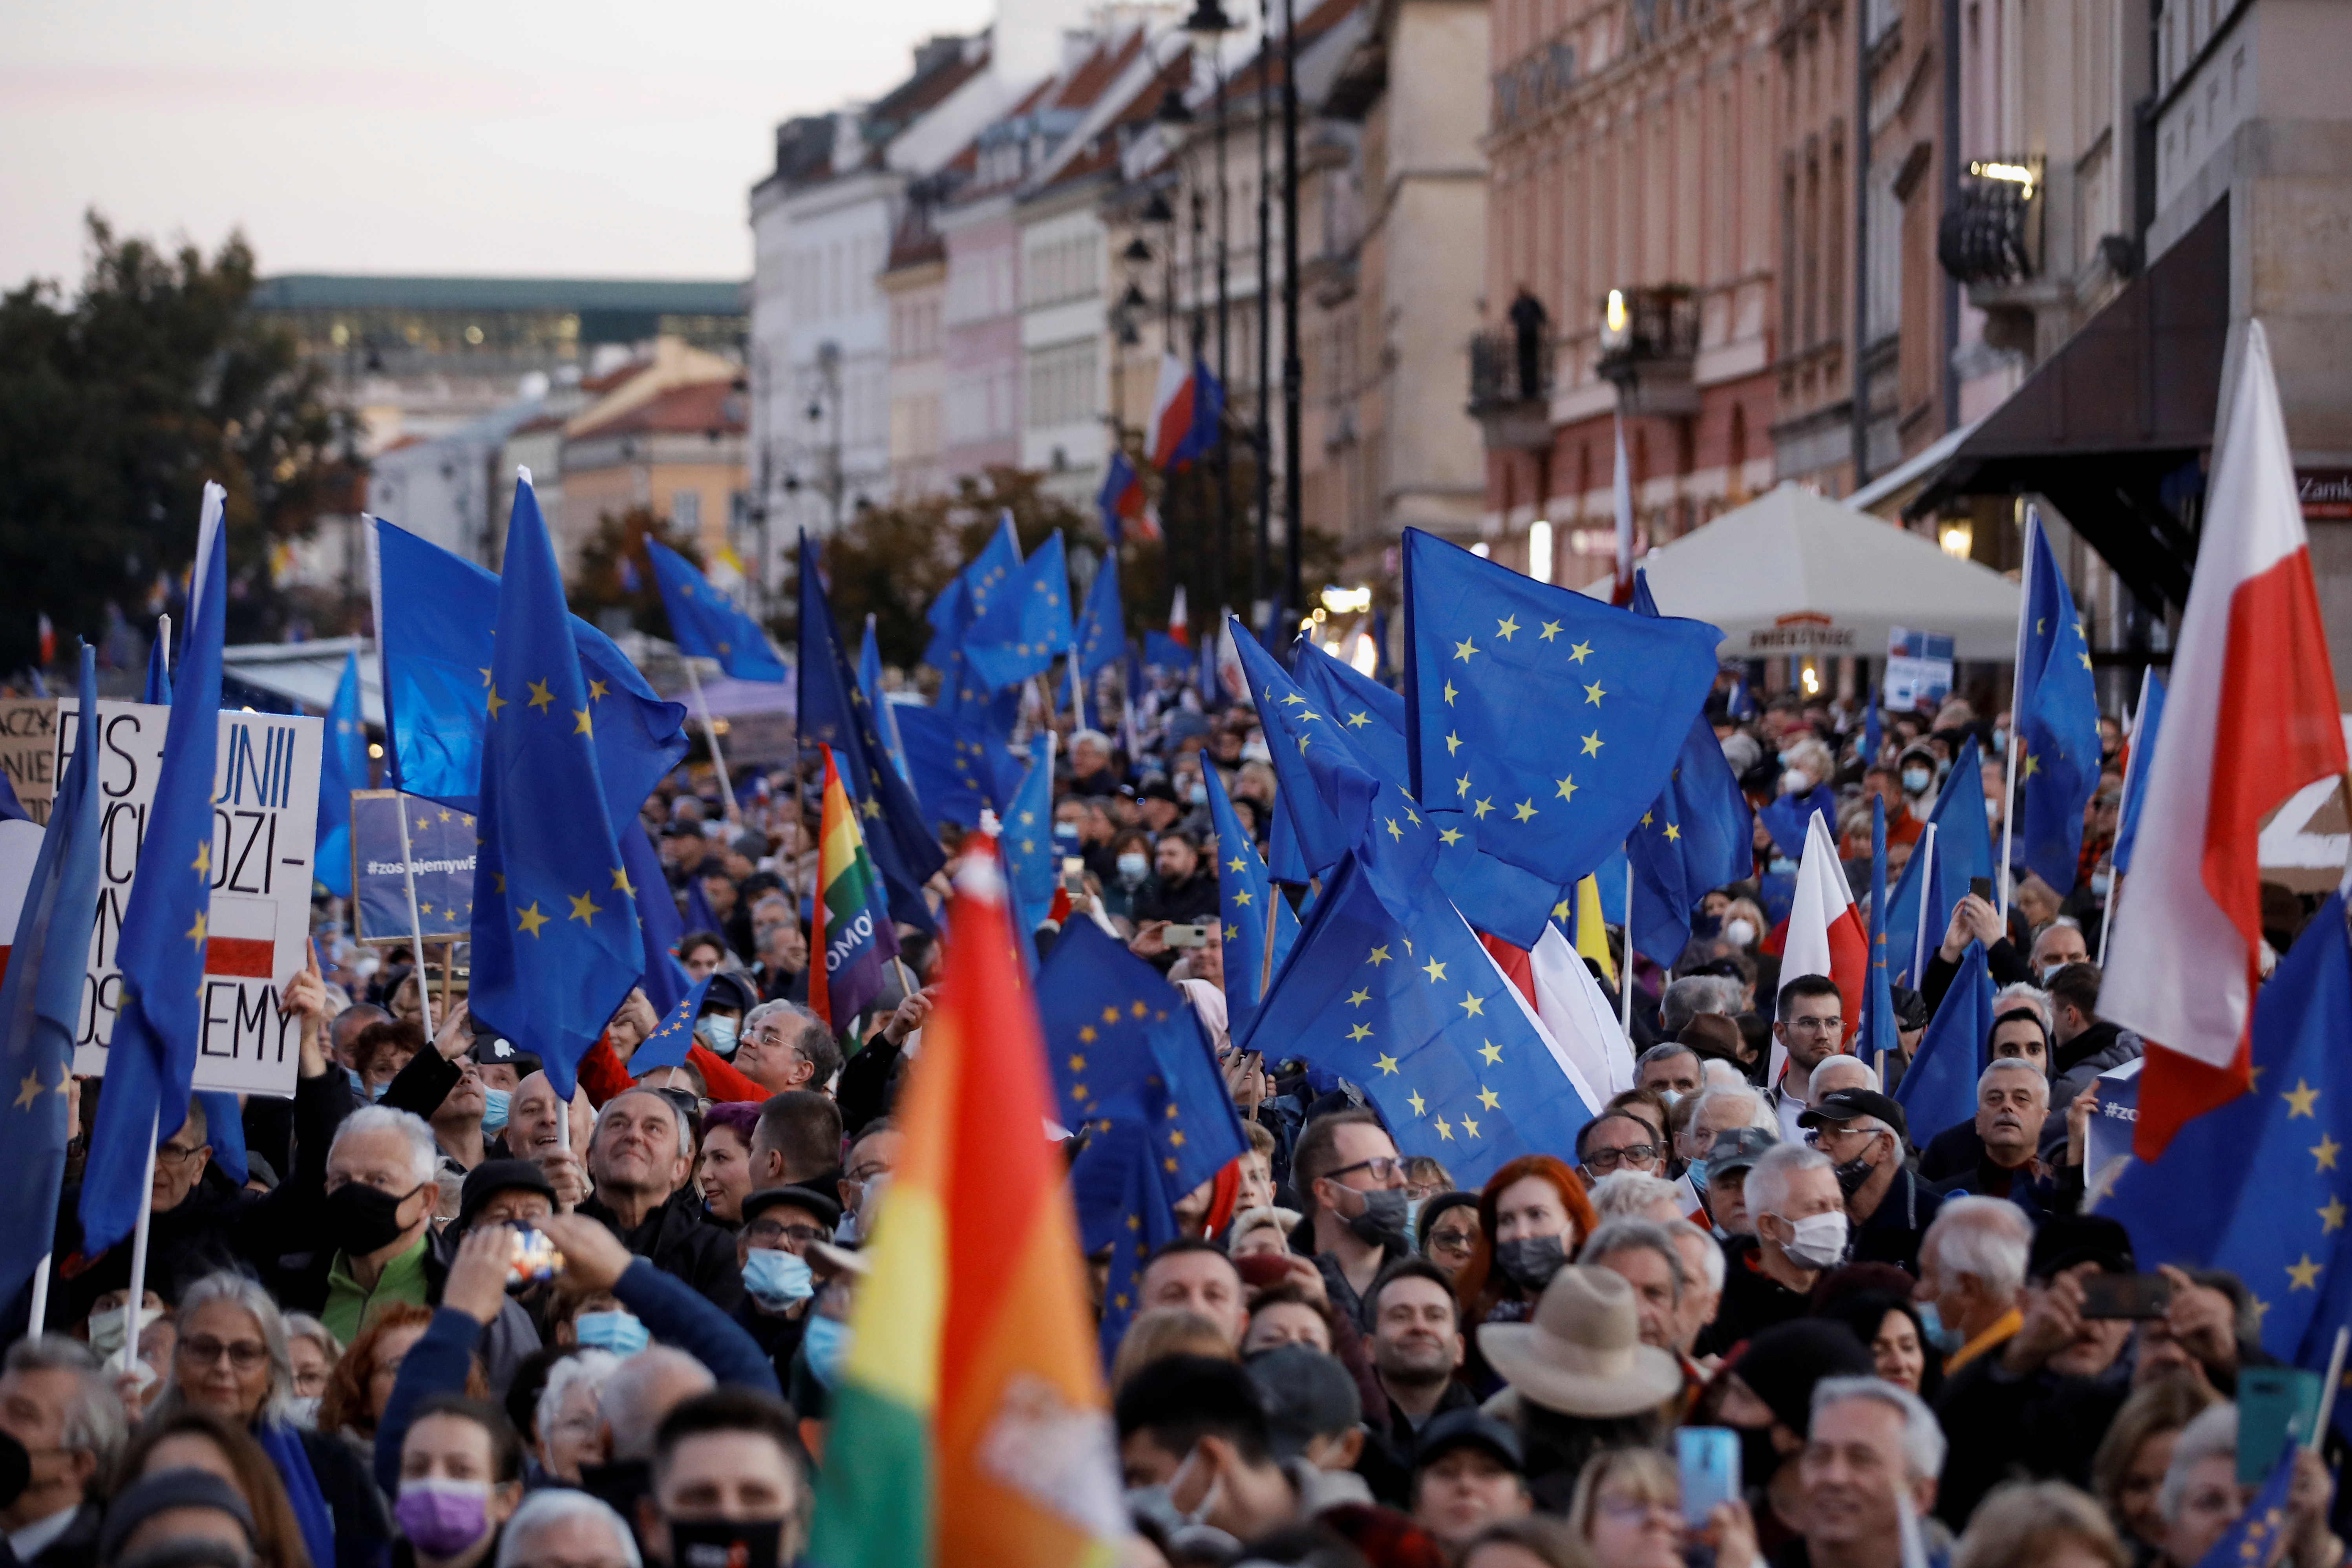 Rally in support of Poland's membership in the European Union, in Warsaw